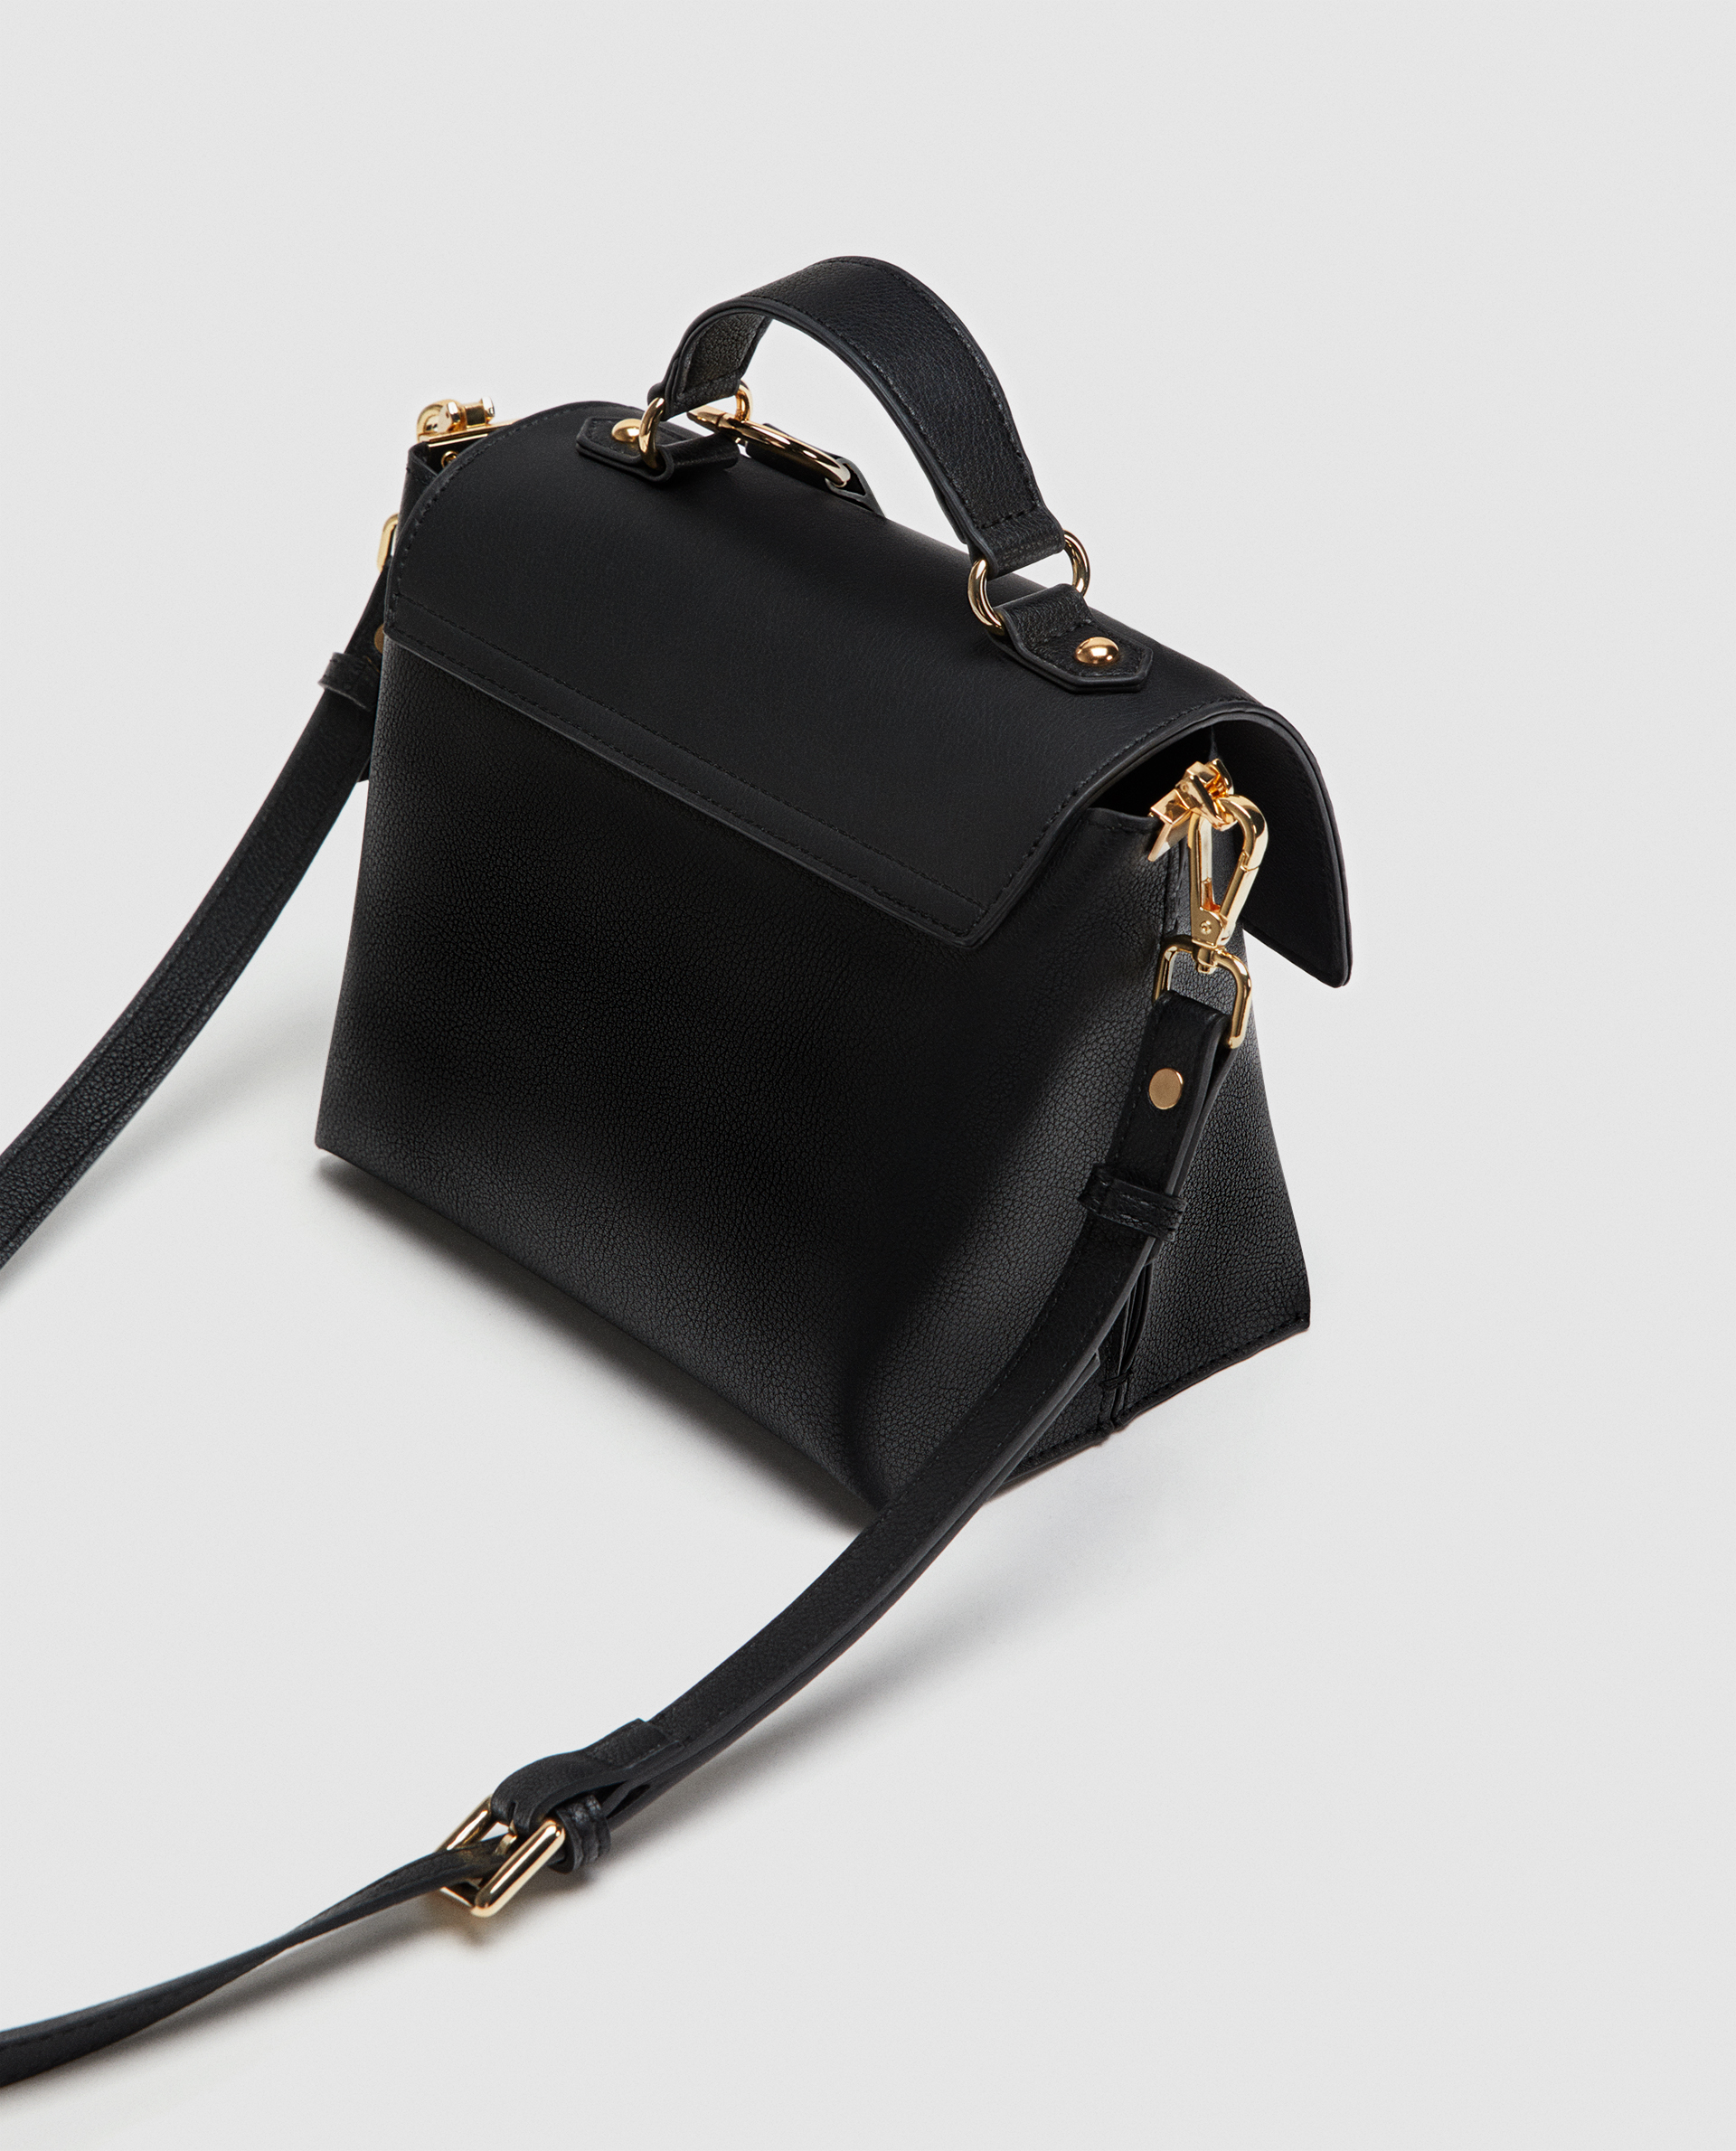 Zara CITY BAG WITH SLOGAN PENDANT DETAIL at £15.99 | love the brands